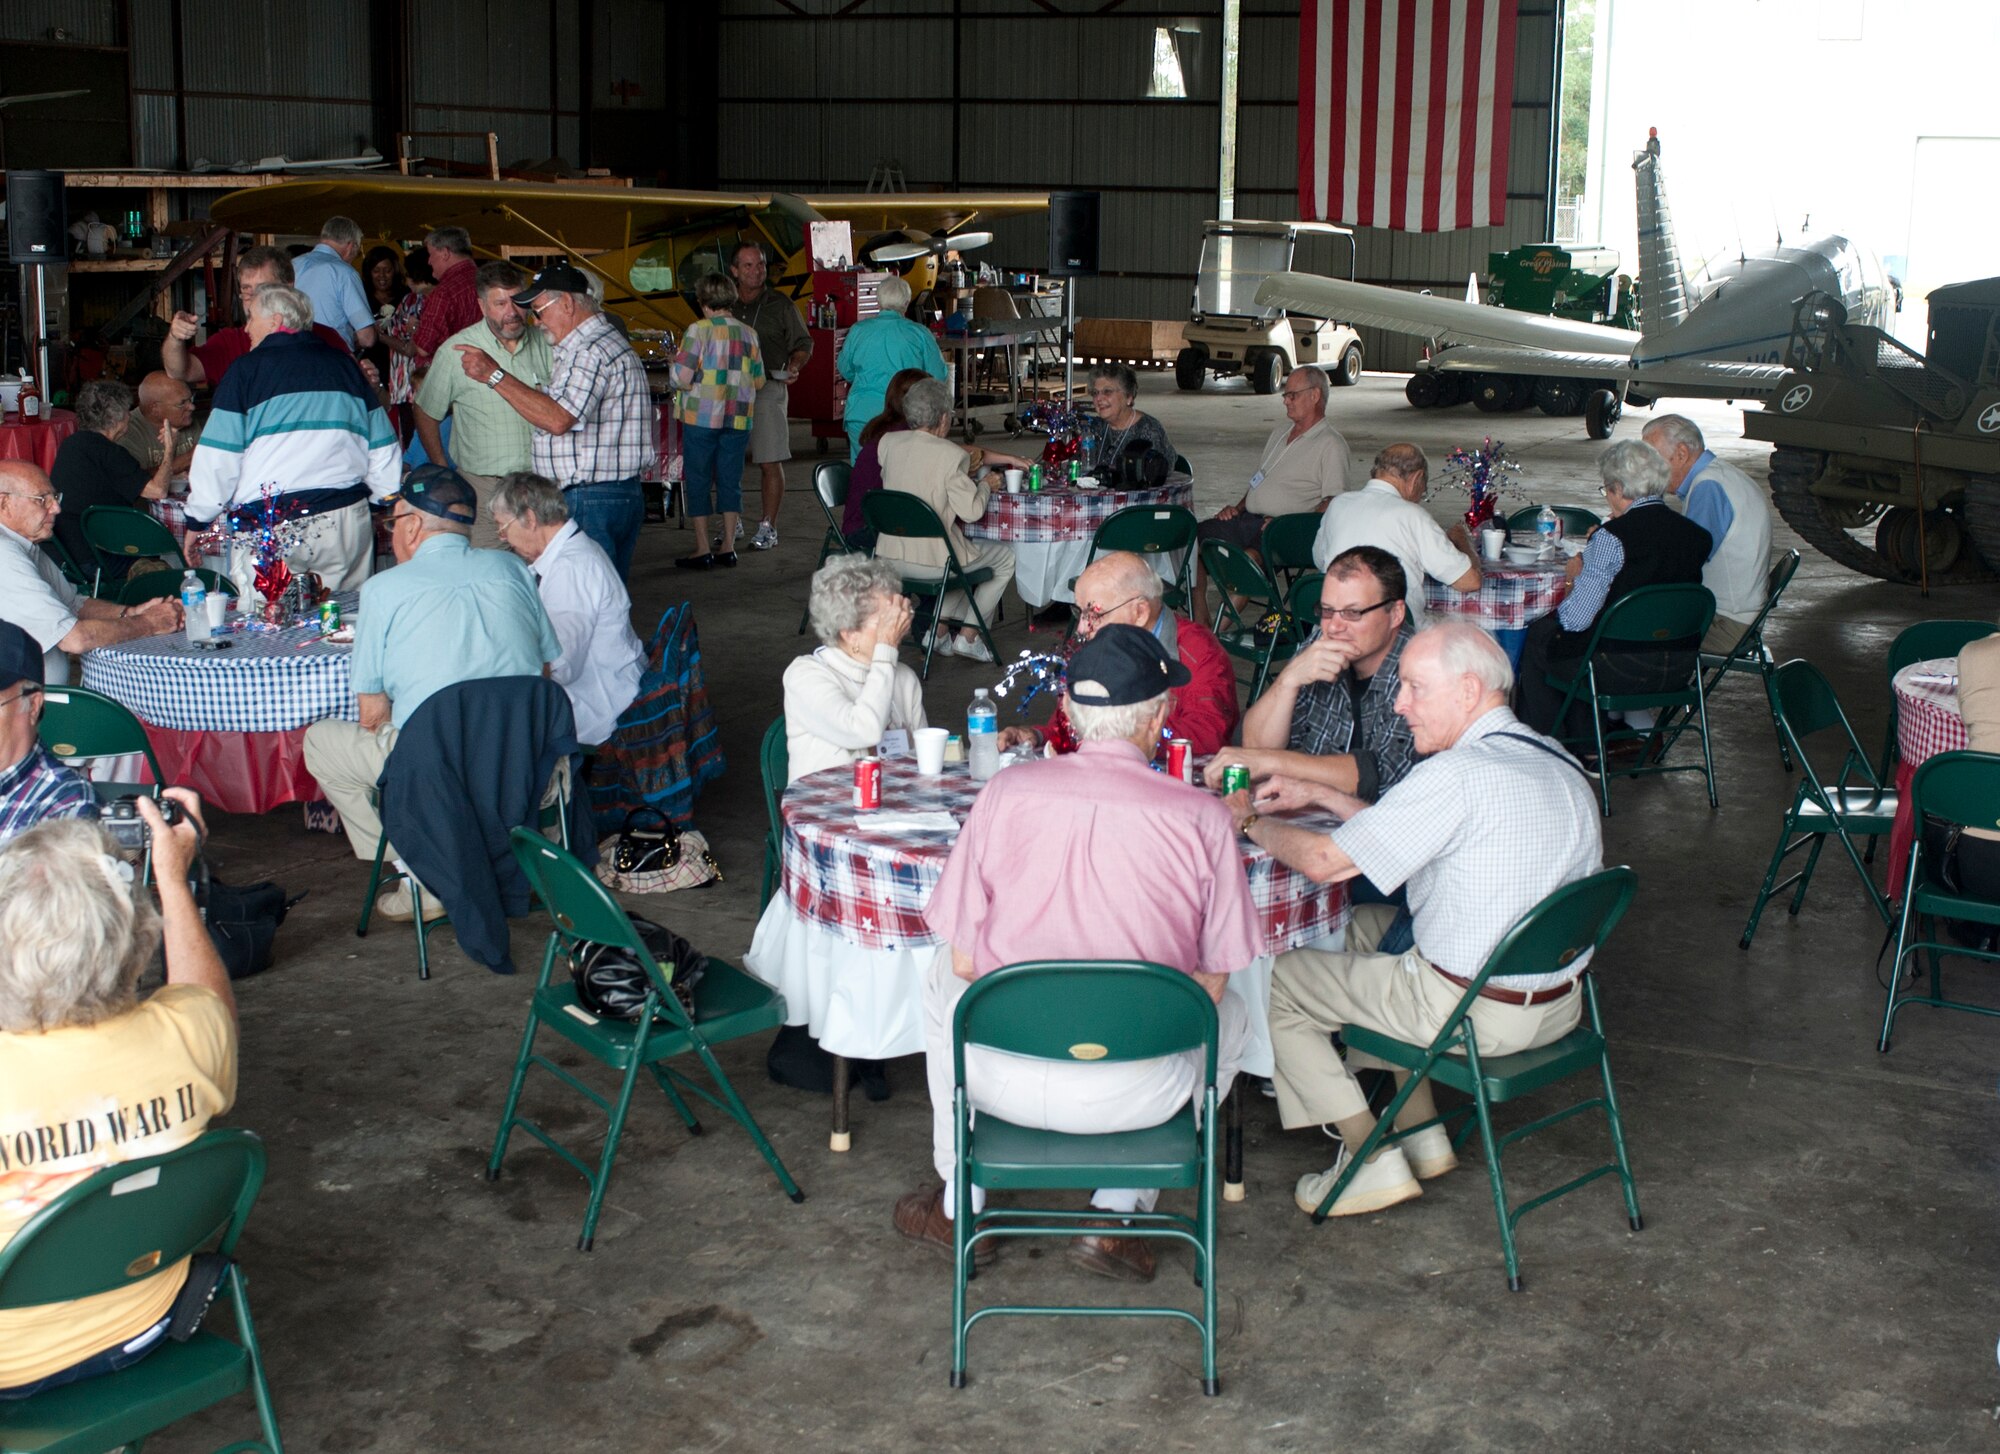 Retired and former World War II pilots and guests gather for the 2011 reunion of the 63rd Flying Training Detachment in Douglas, Ga., Oct. 18, 2011. The first class of cadets arrived at in Douglas and began training Oct. 3, 1941. (U.S. Air Force photo by Airman 1st Class Jarrod Grammel/Released)
